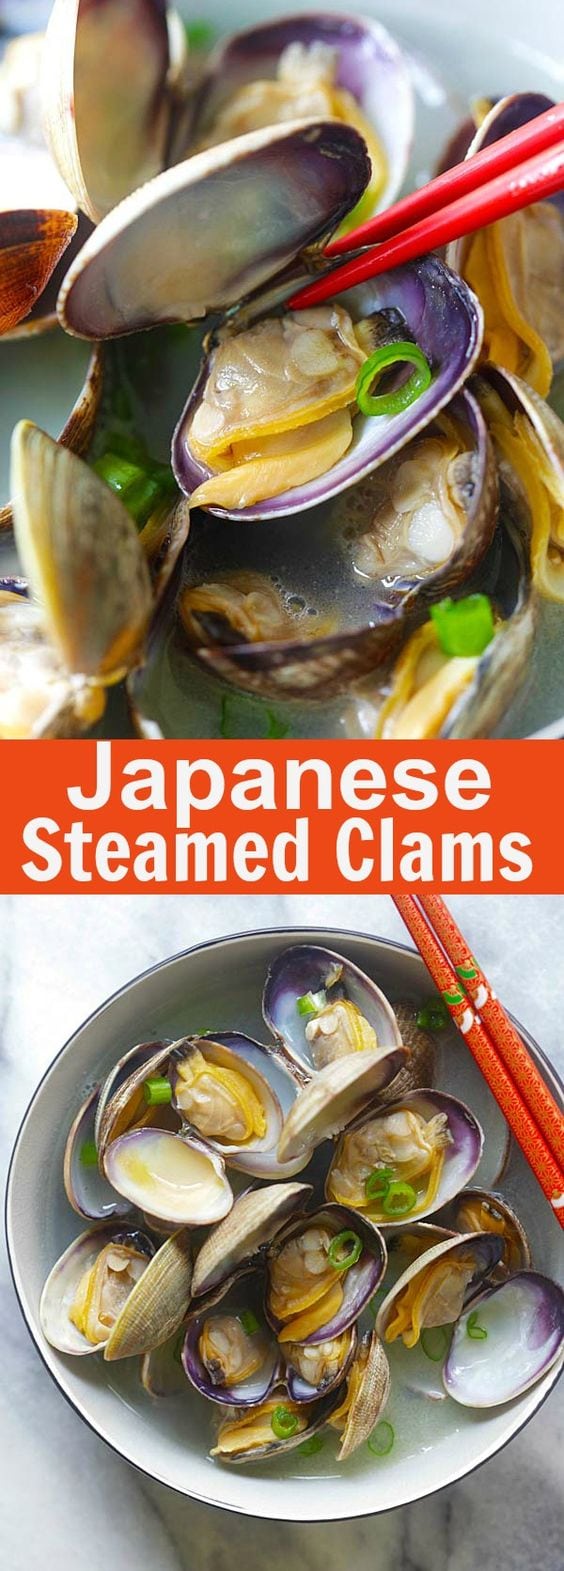 Japanese Steamed Clams - Manila (Asari) clams with butter, Japanese sake and mirin. Briny, delicious and takes only 10 mins | rasamalaysia.com